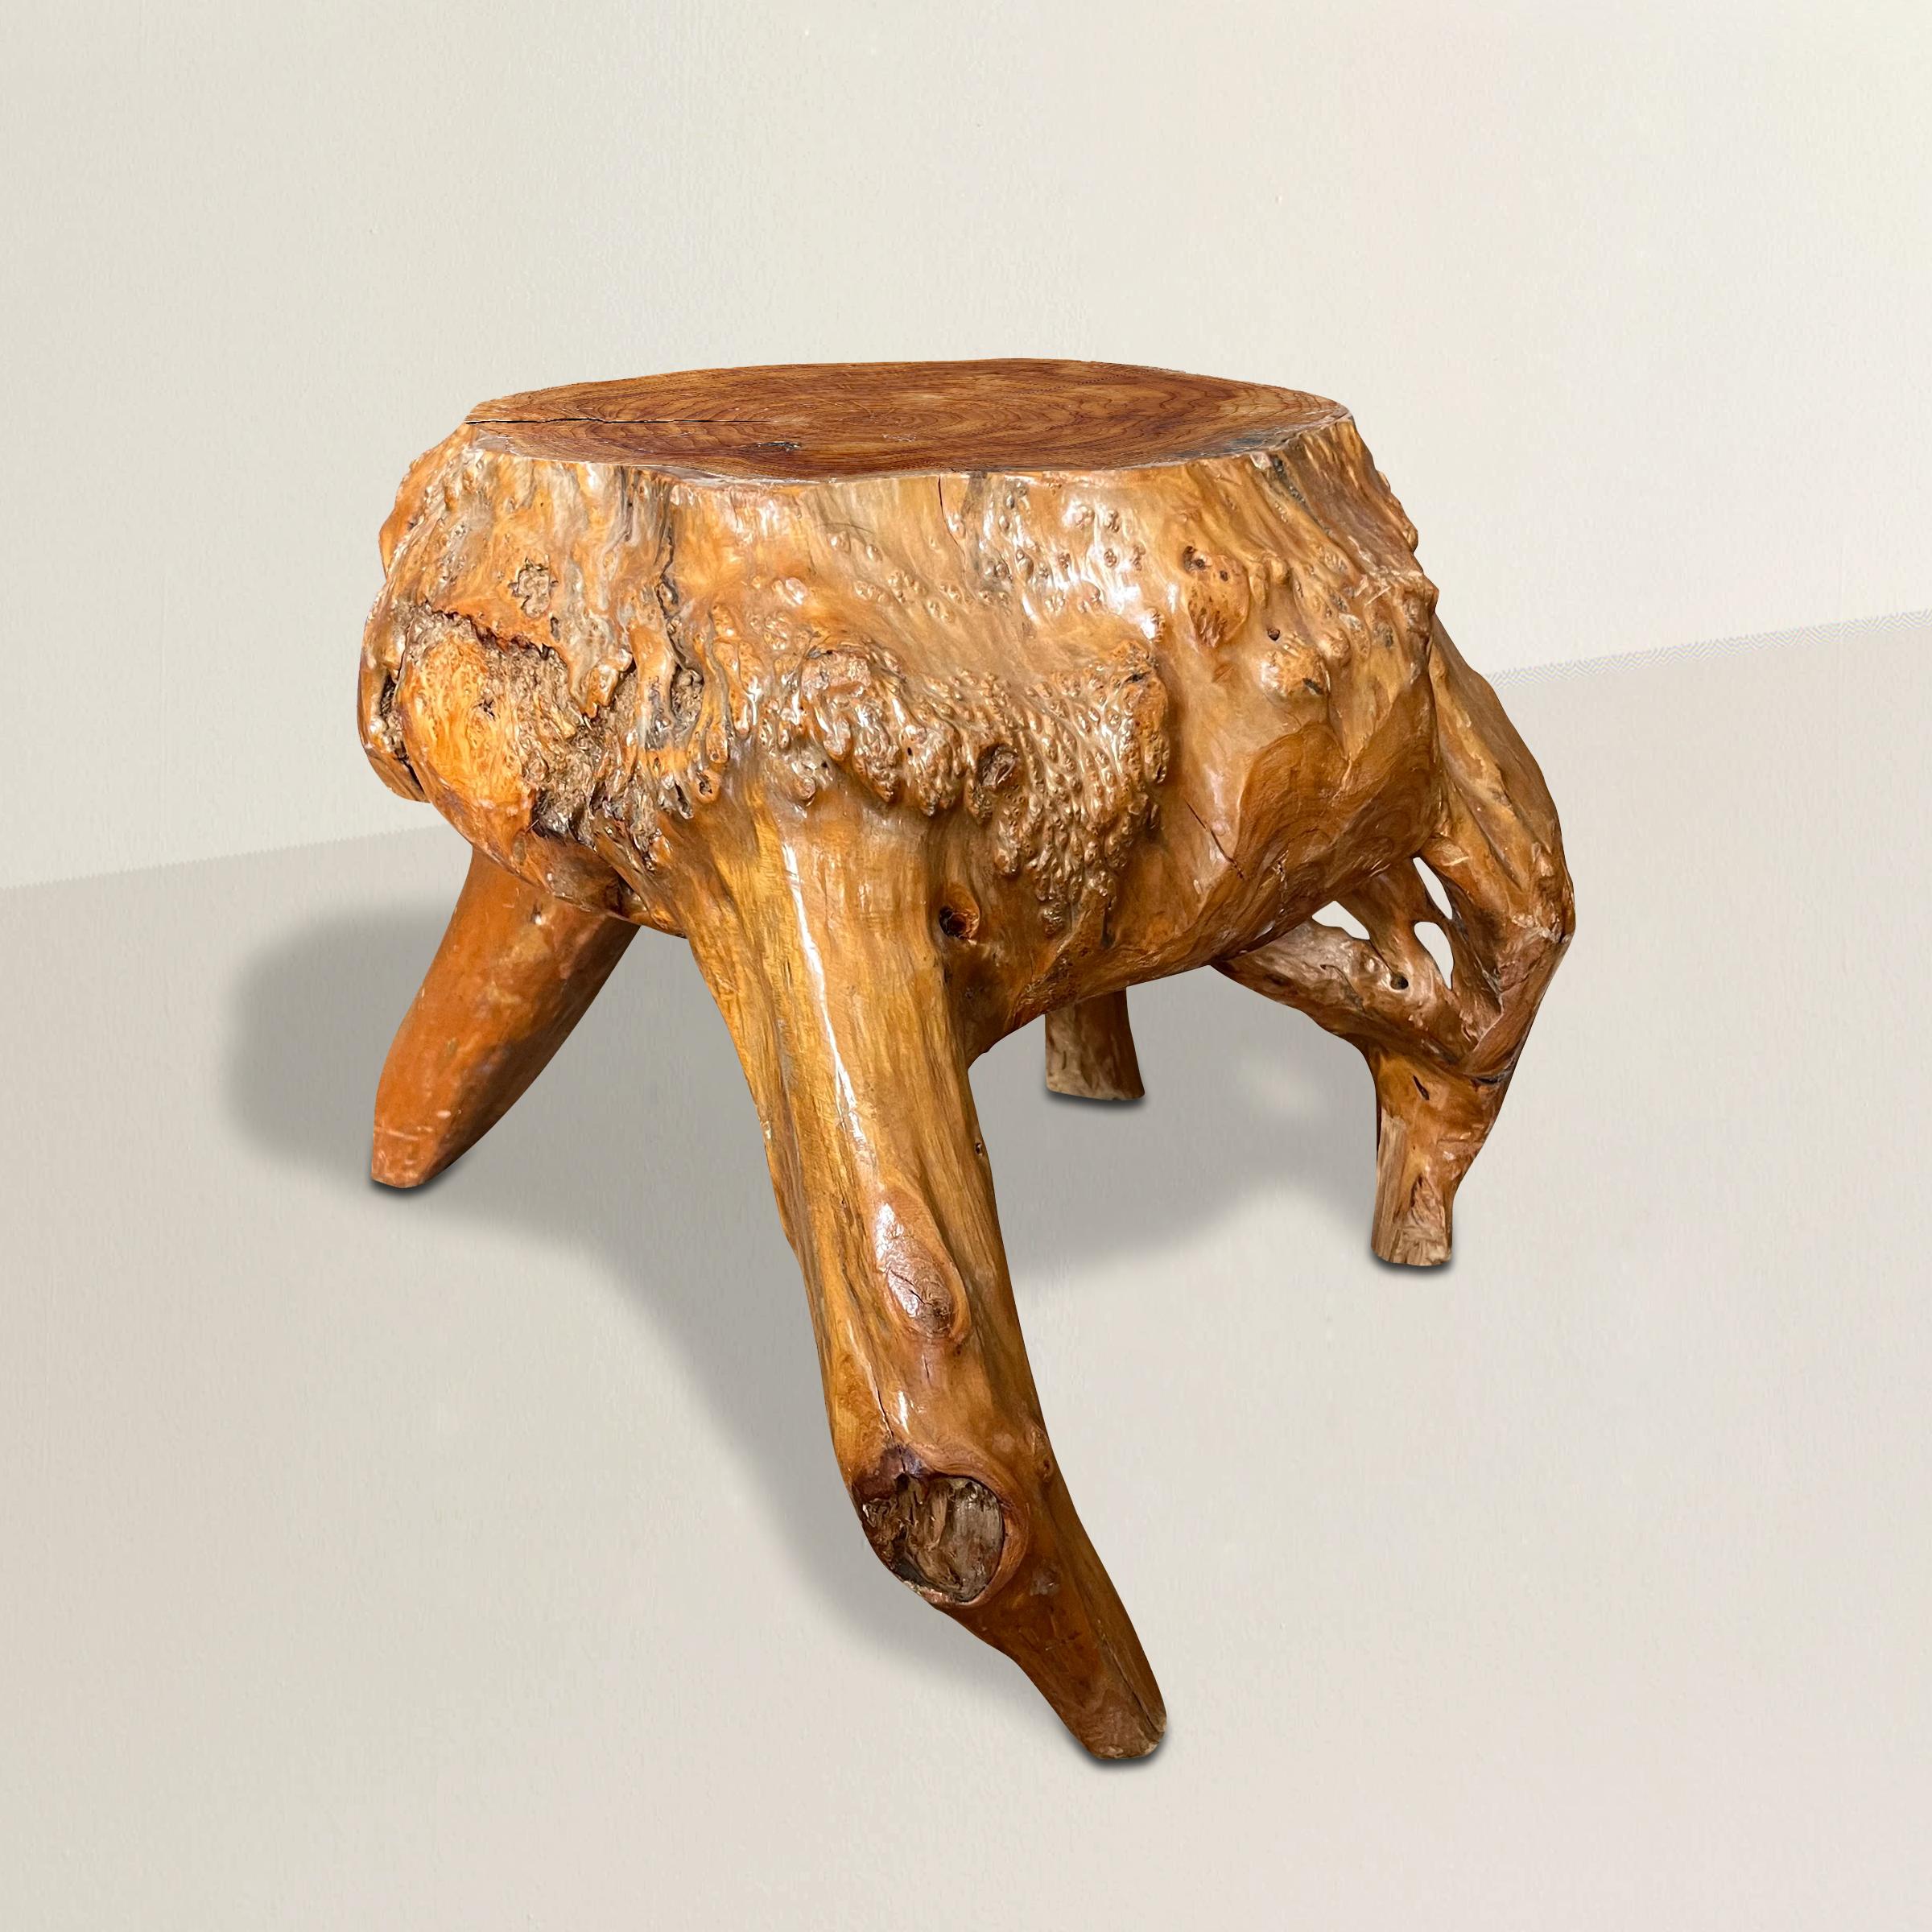 A striking and animated 20th century root wood stool with four snarled legs supporting a squatty burled top, and with a wonderful glowing patina. The perfect extra seat for unexpected guests, or a perch for a cocktail or book next to your favorite